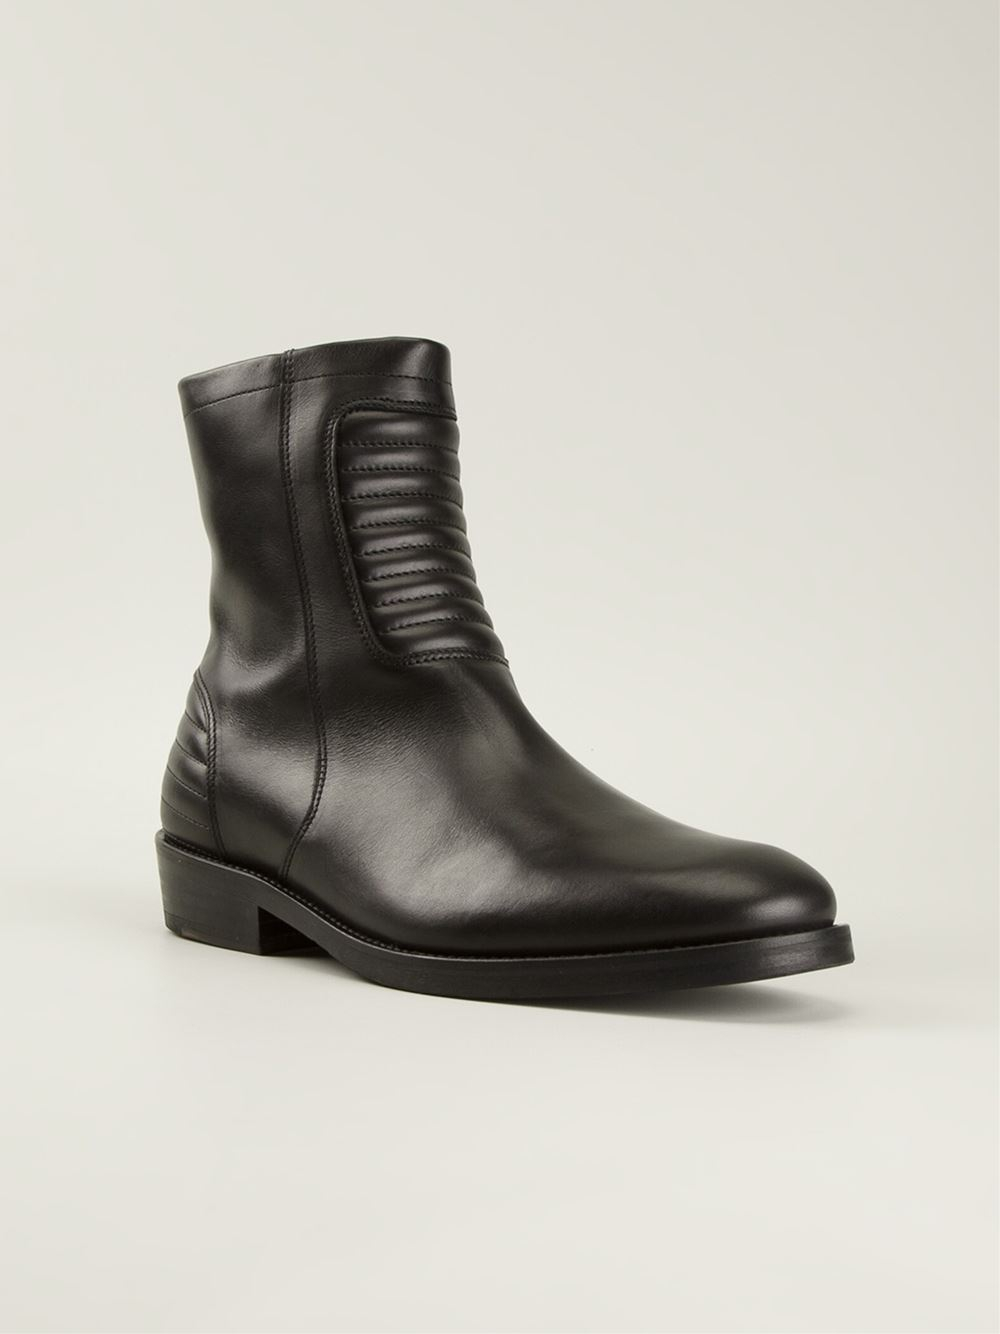 Surface To Air Biker Boots in Black for Men | Lyst